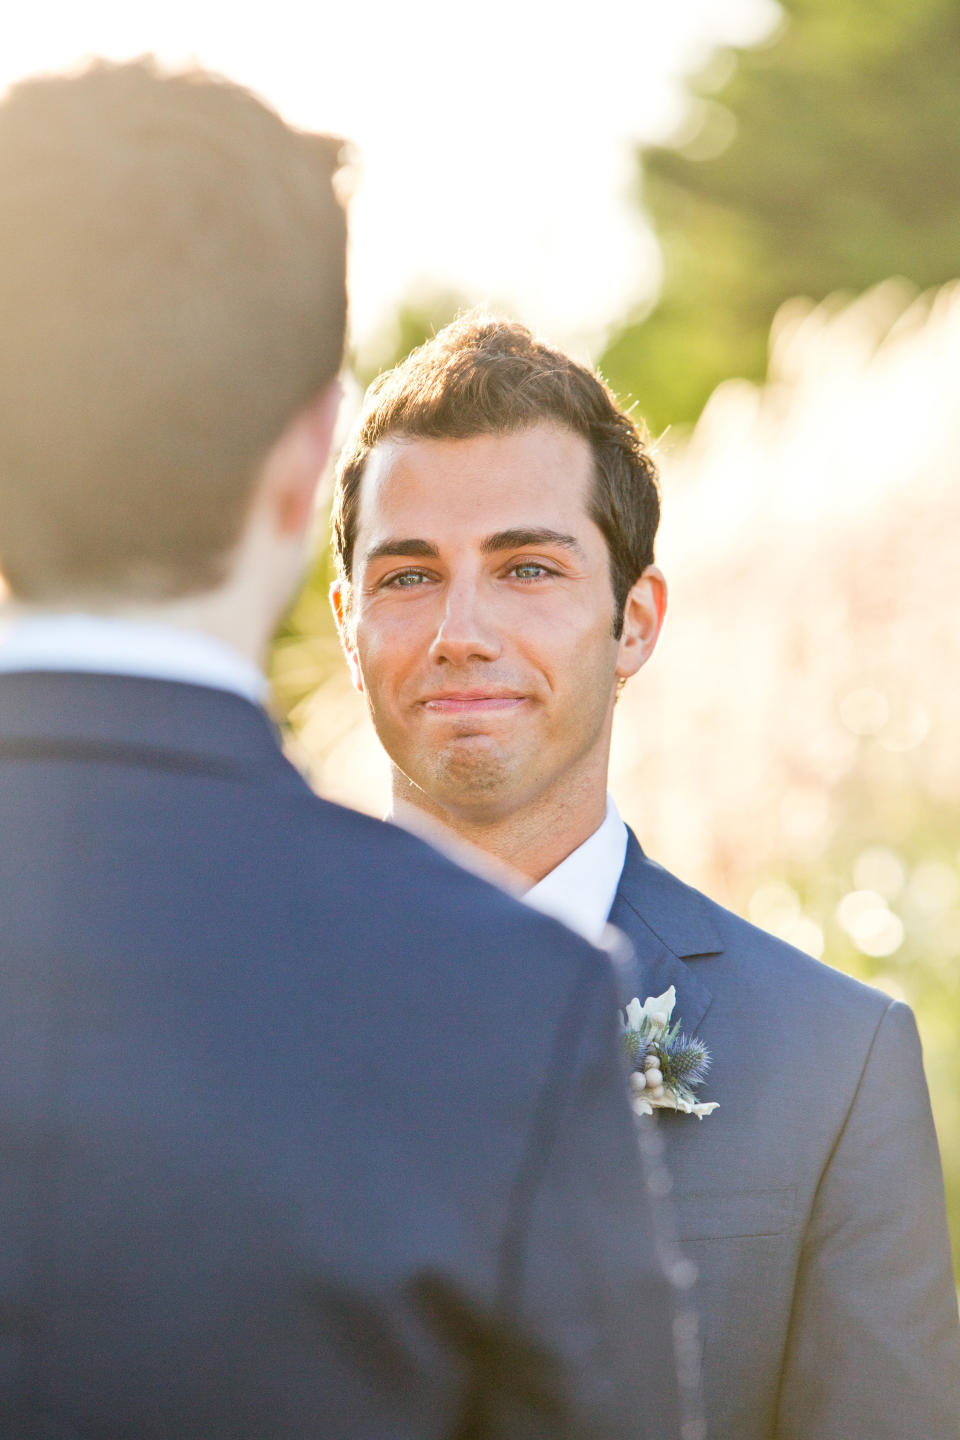 <p>"Jason's eyes welled up with tears as he listened to Nick recite personalized vows during their ceremony." - Lauren Saldutti&nbsp;</p>